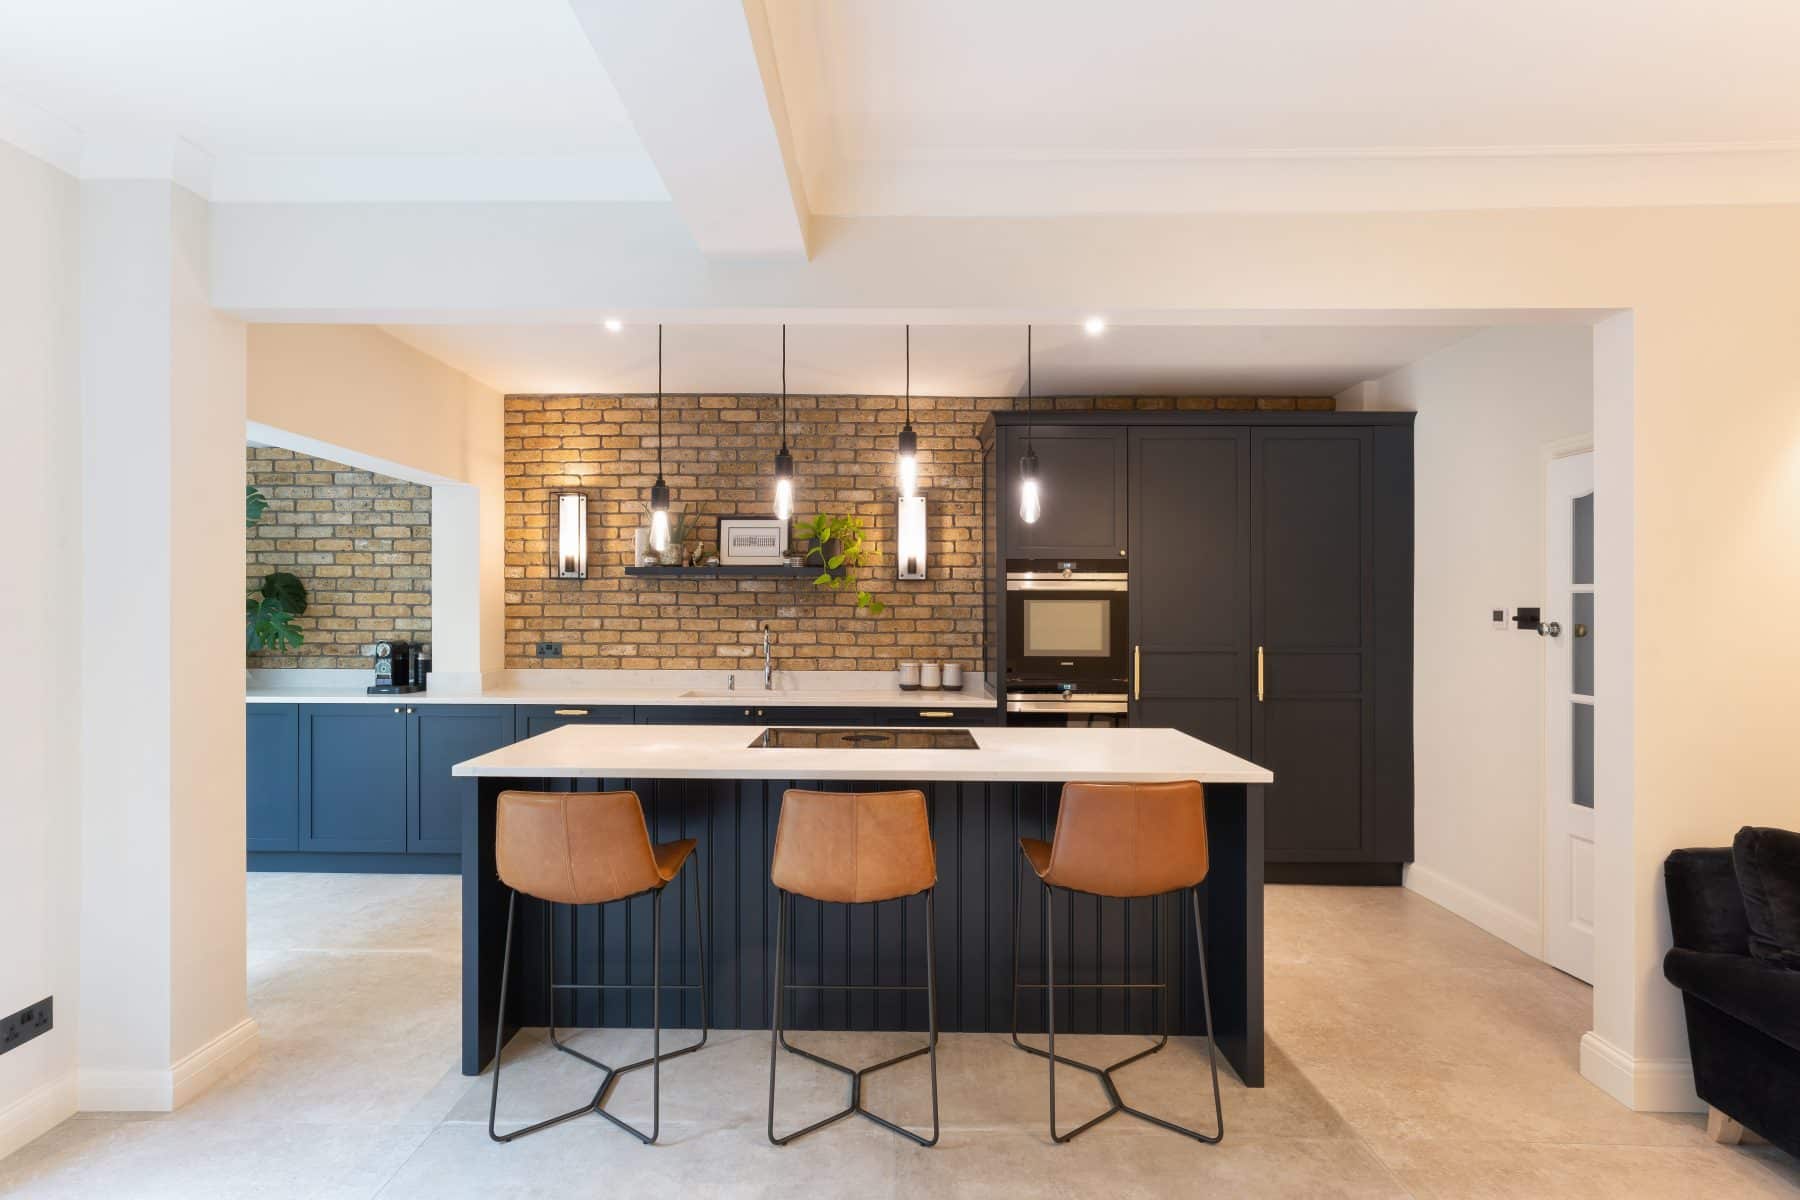 Modern kitchen with a black island featuring a built-in hob with white countertops and three brown, leather bar stools, and exposed brick walls, illuminated by black pendant lights.